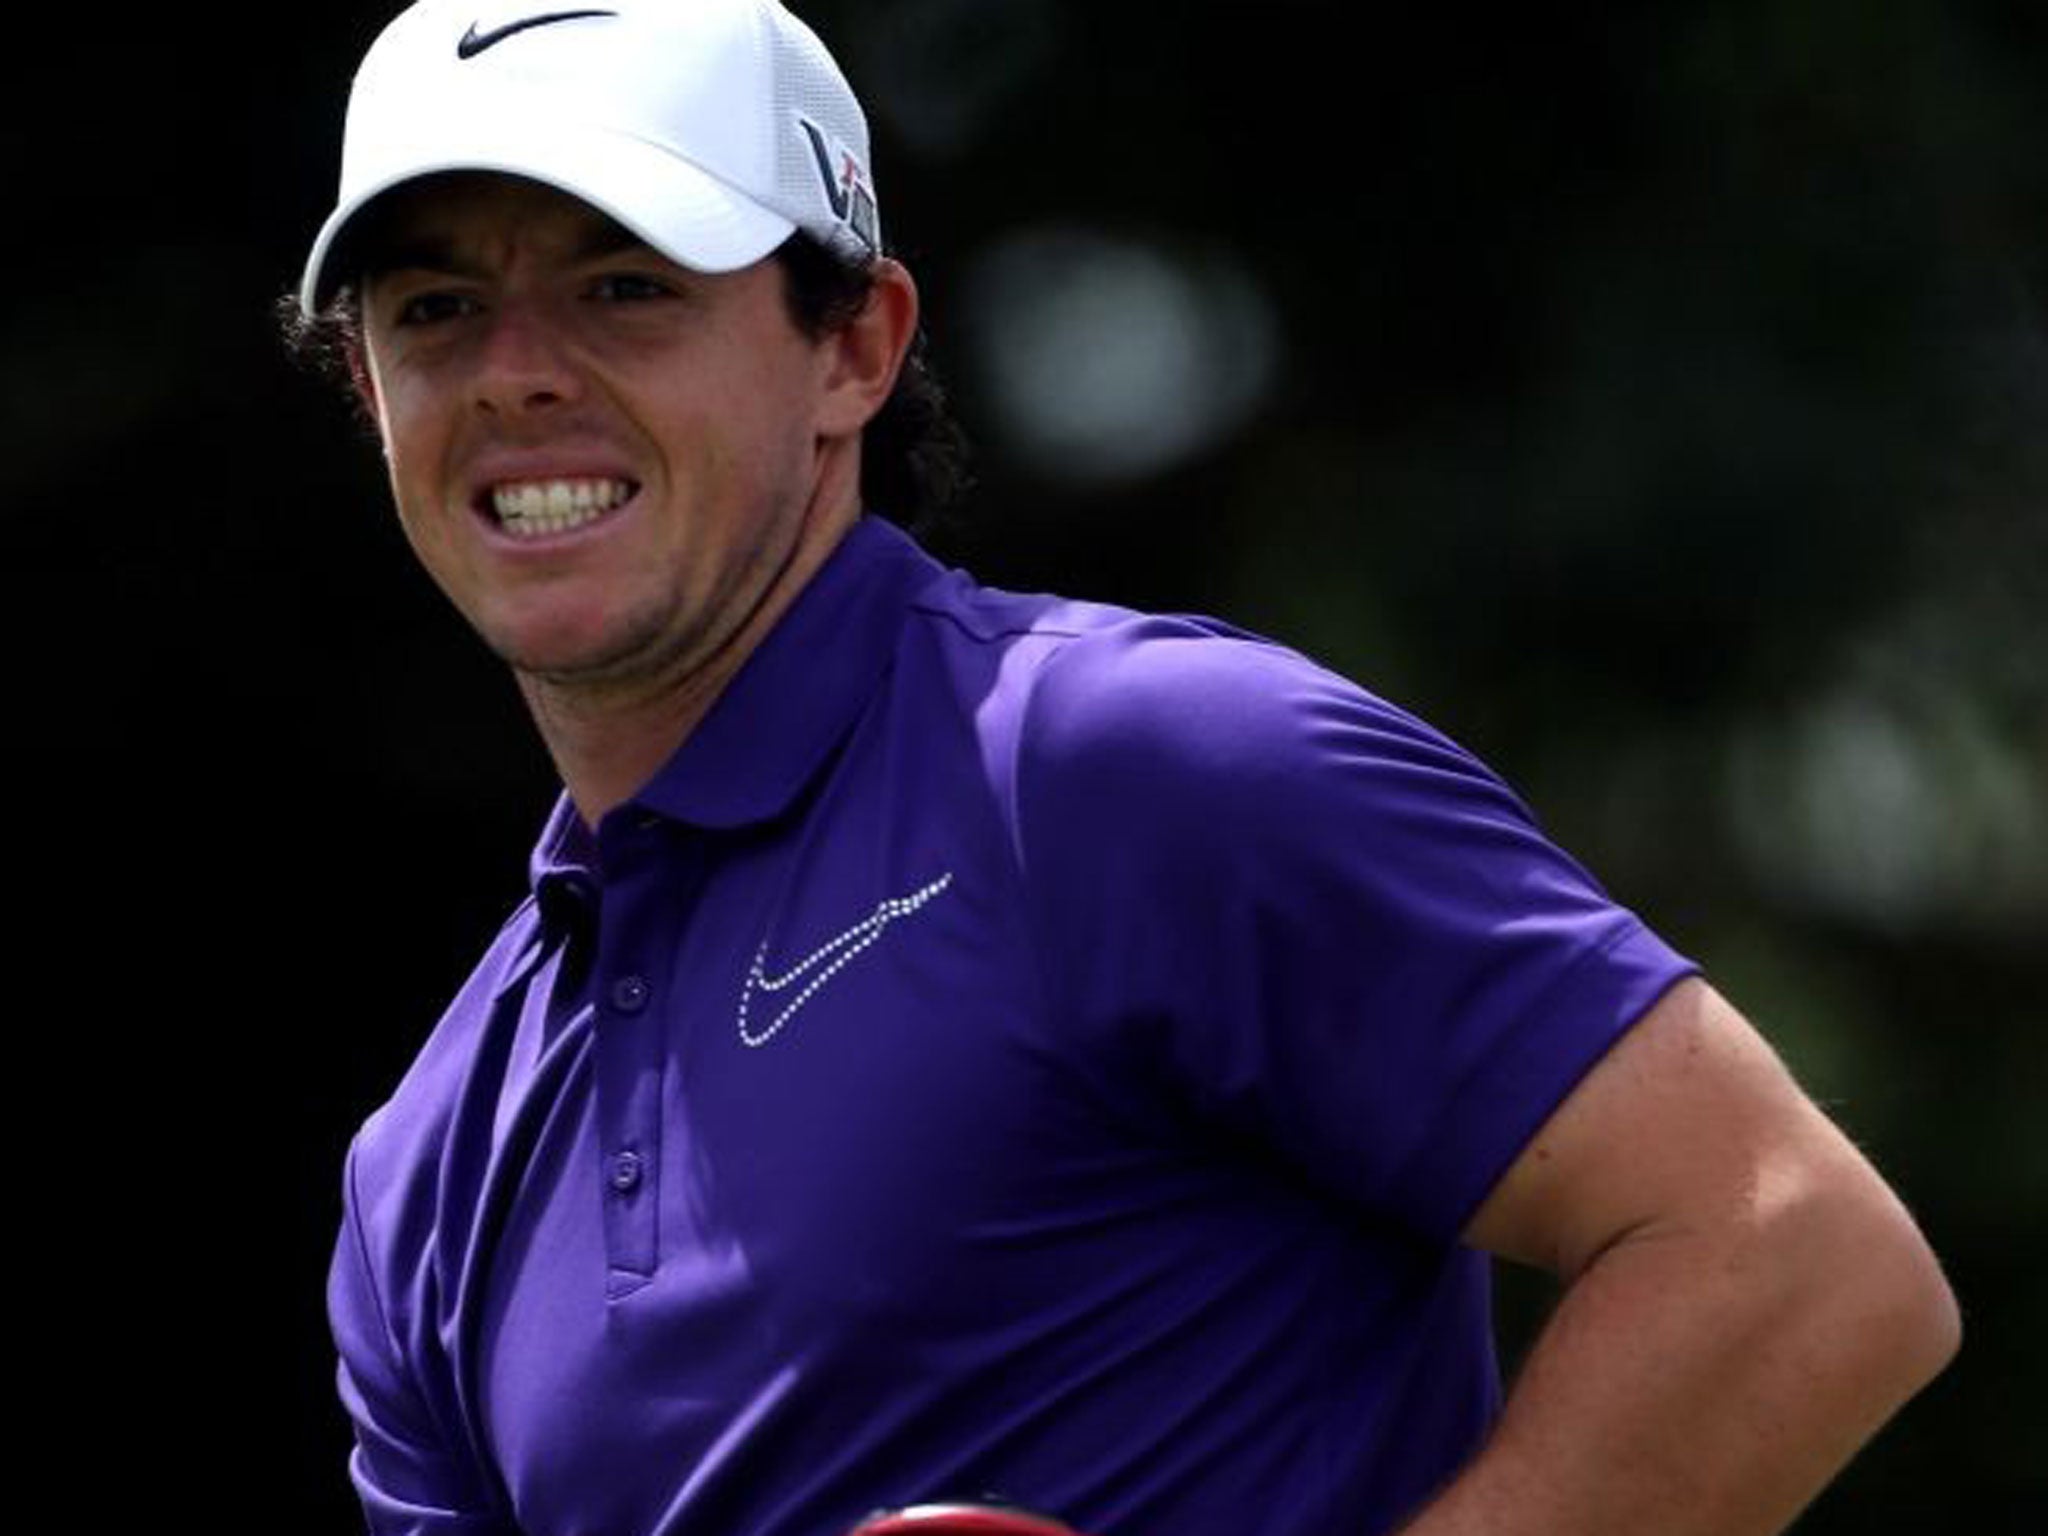 Rory McIlroy was smiling again yesterday after hitting a seven under par final round in Doral